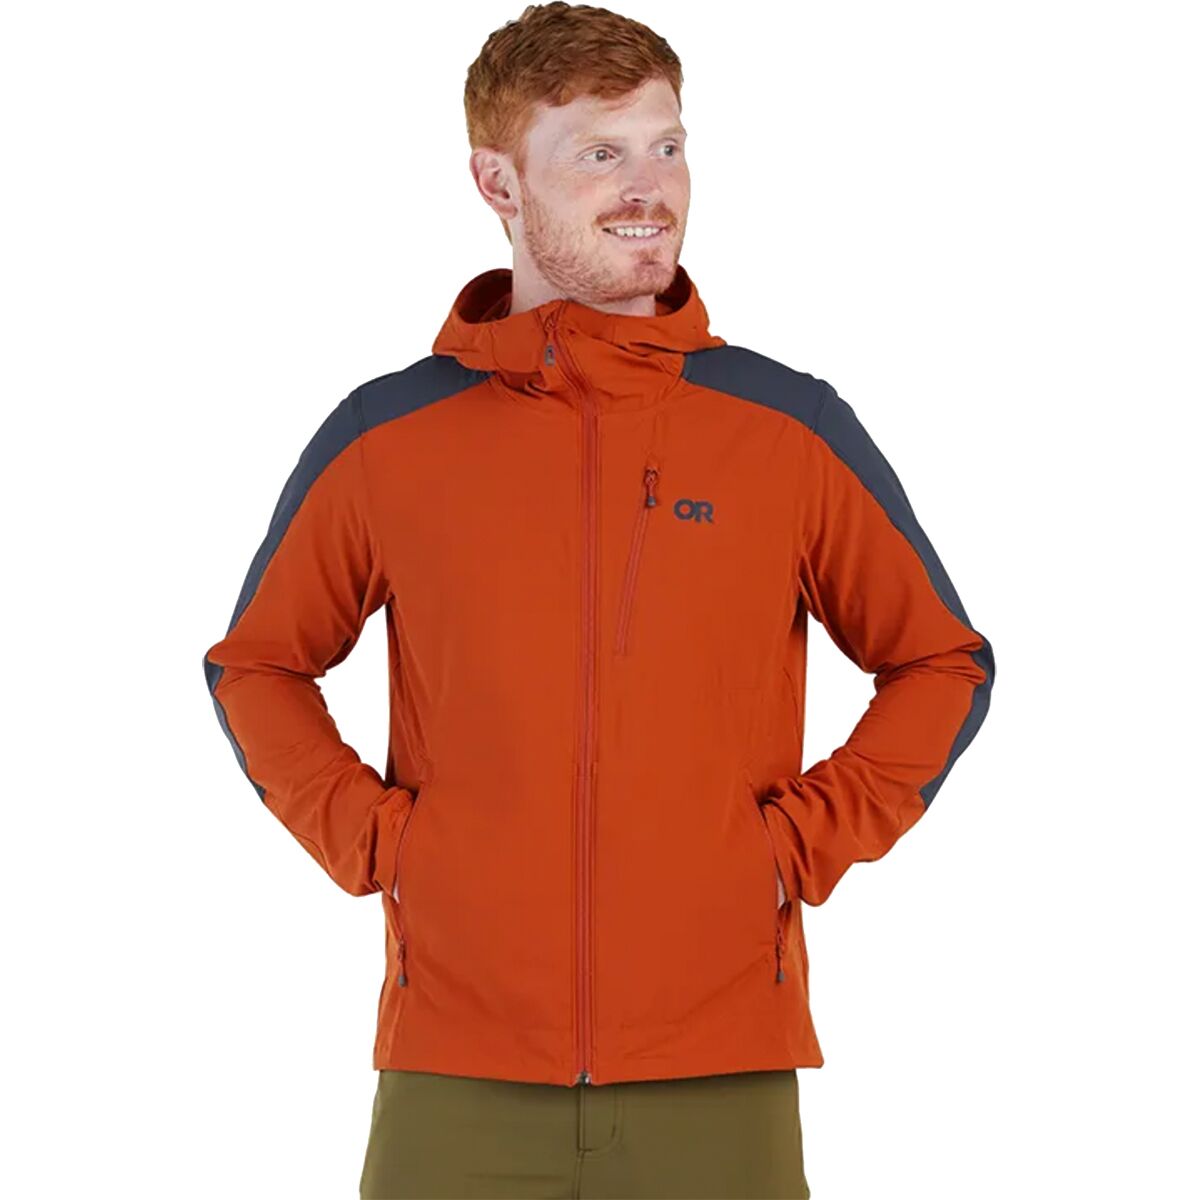 Soft Shell Jackets for Men  Best Price Guarantee at DICK'S